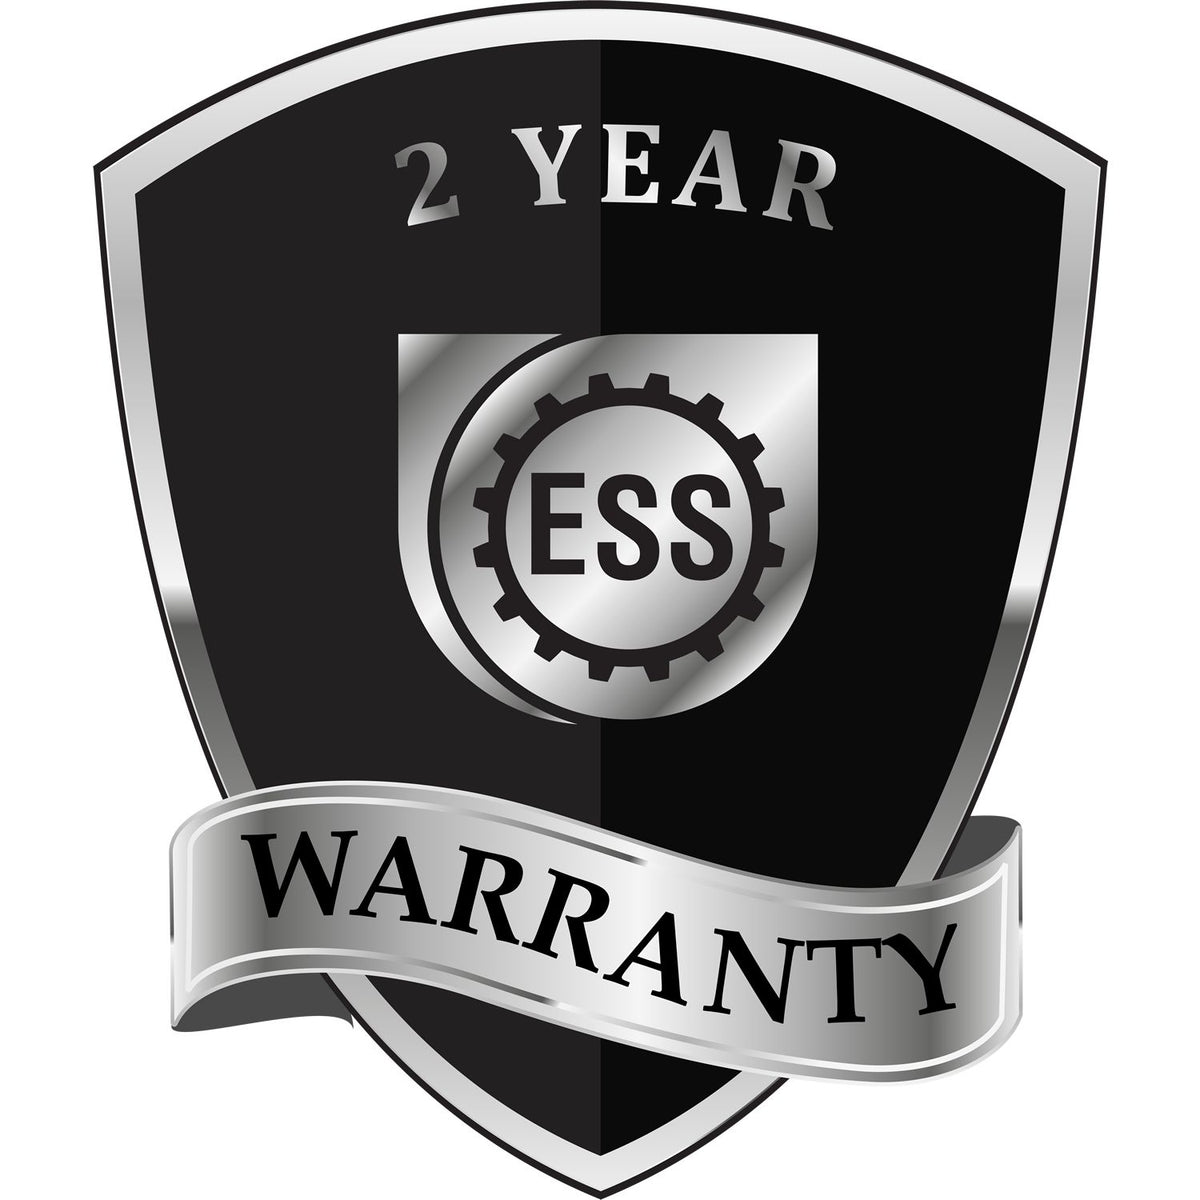 A badge or emblem showing a warranty icon for the Heavy Duty Cast Iron Nevada Land Surveyor Seal Embosser